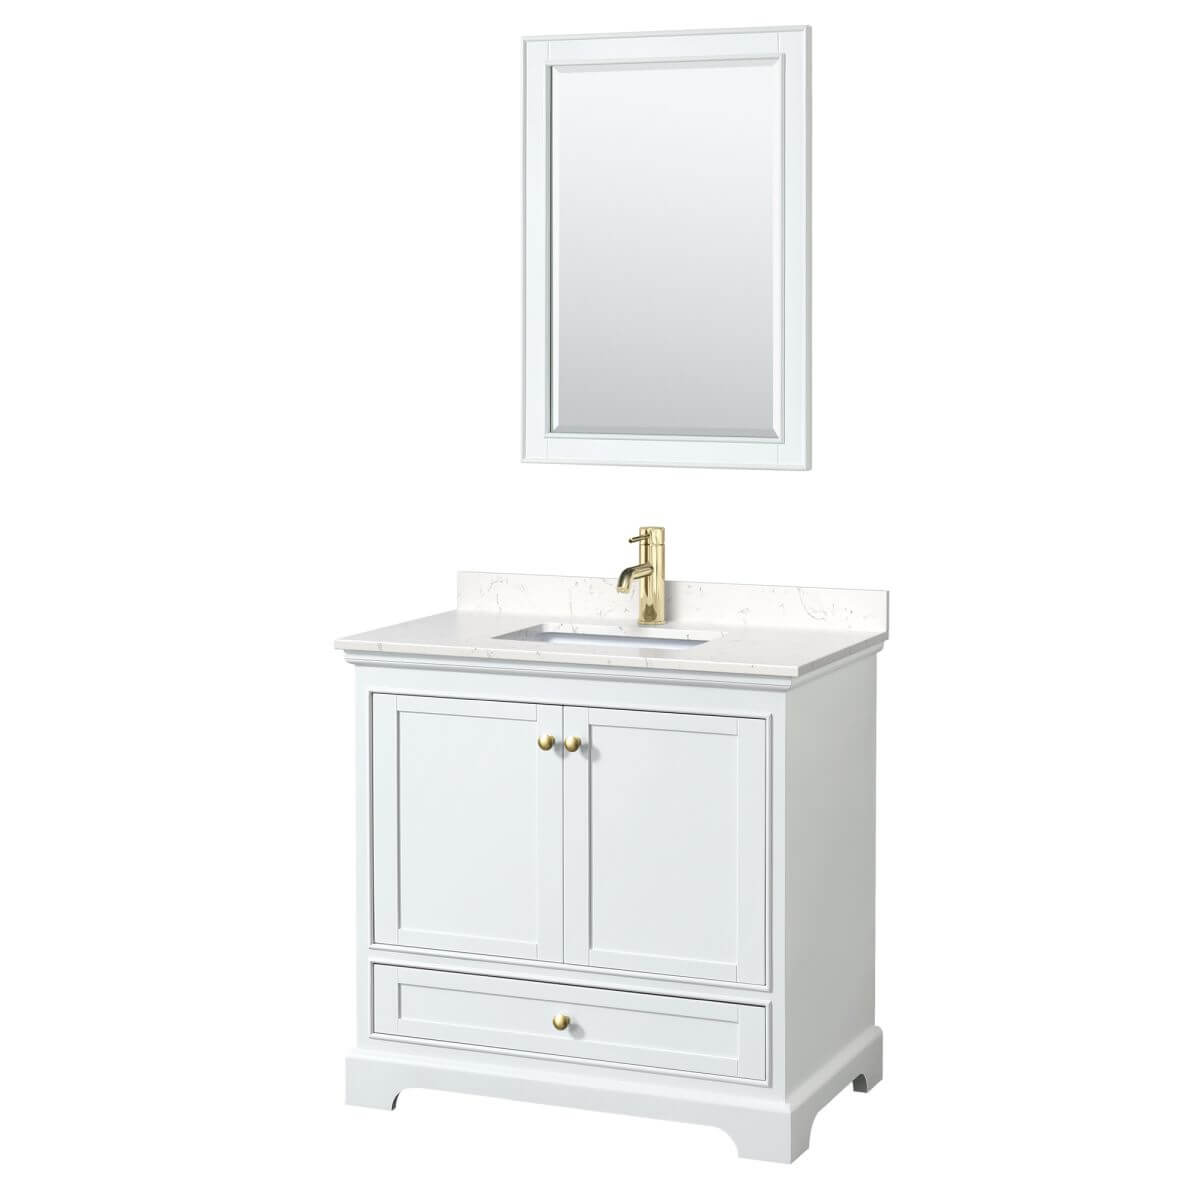 Wyndham Collection Deborah 36 inch Single Bathroom Vanity in White with Carrara Cultured Marble Countertop, Undermount Square Sink, Brushed Gold Trim and 24 inch Mirror - WCS202036SWGC2UNSM24